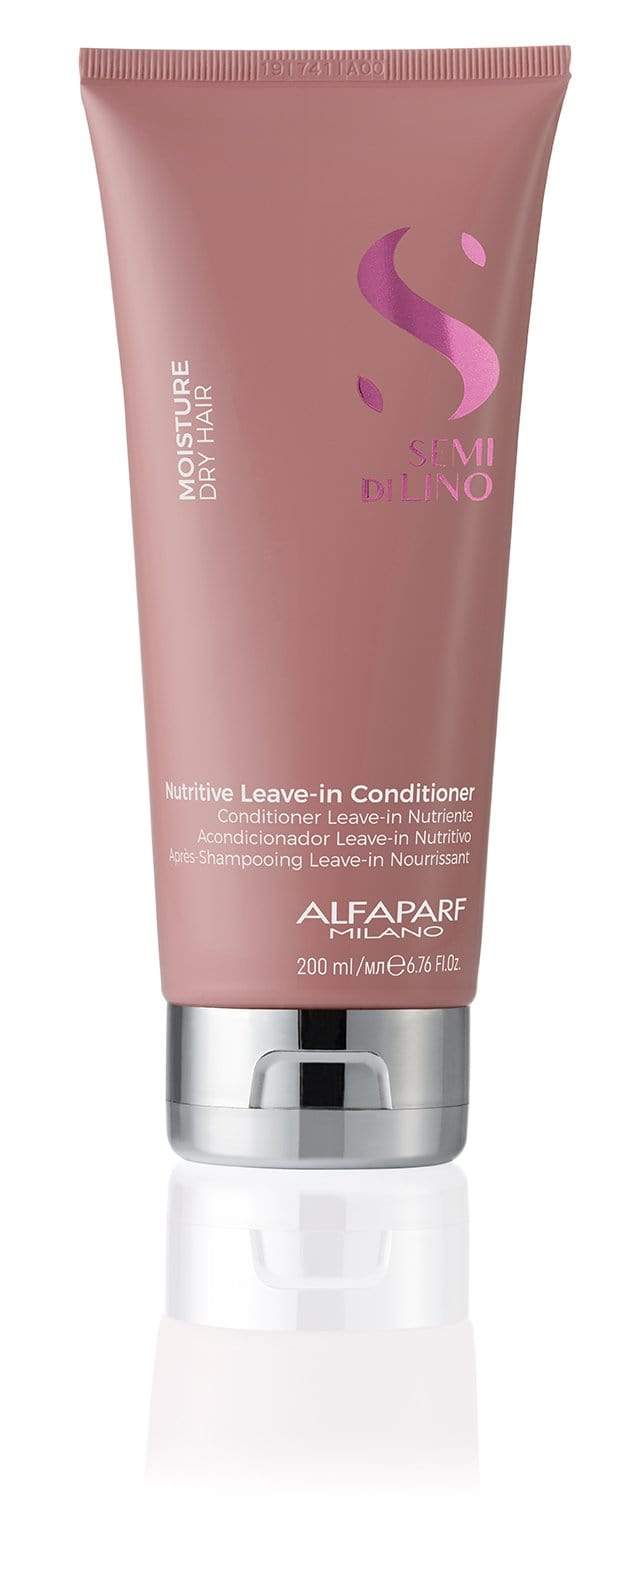 AlfaParf Semi Di Lino Moisture Nutritive Leave-in Conditioner (For Dry Hair) 250ml-1liter best shampoo and conditioner for frizzy 